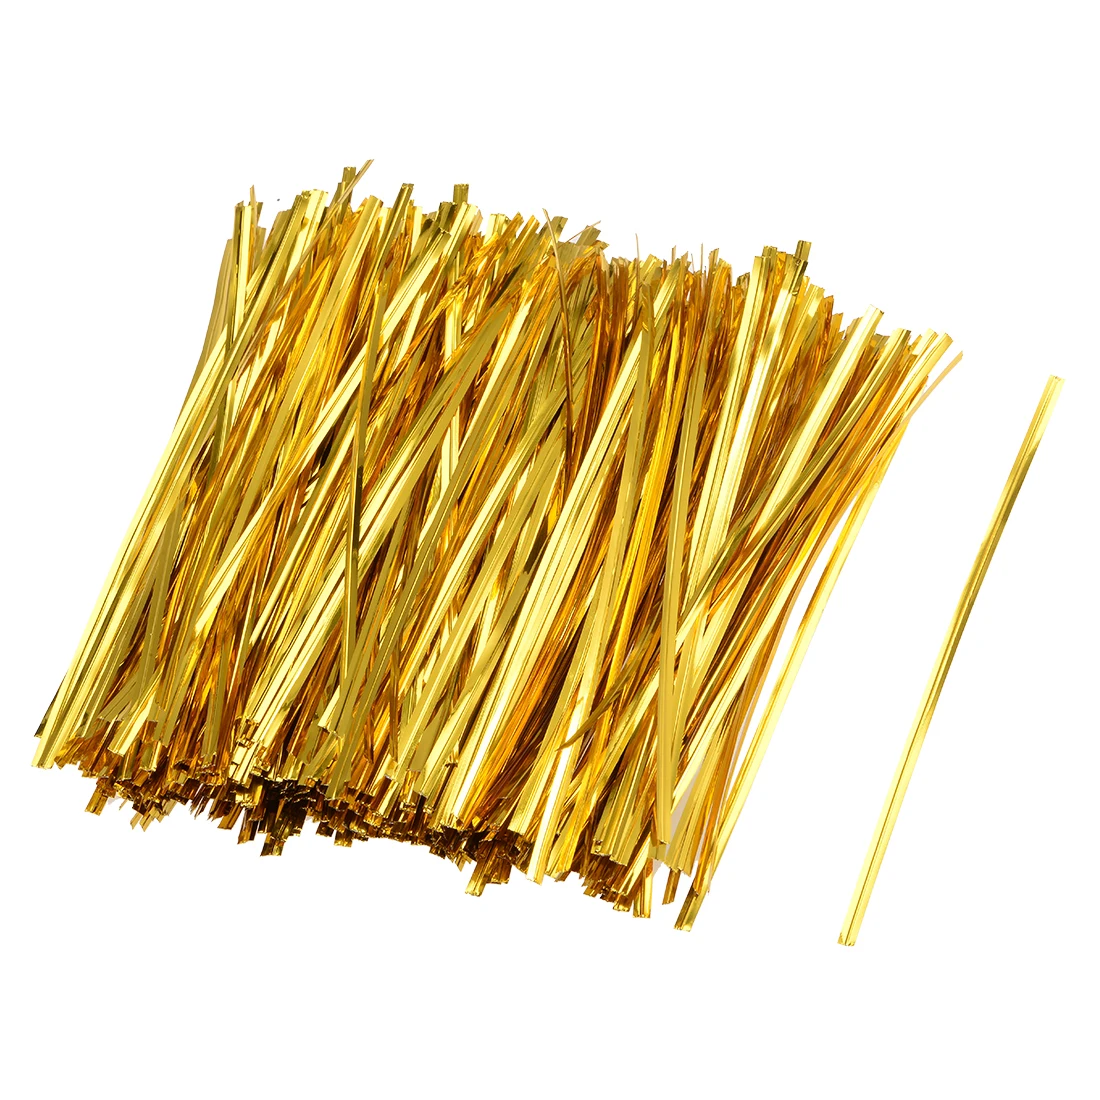 

uxcell 1000pcs Long Strong Twist Ties 4 Inches Quality Plastic Closure Tie Golden For Home, Business, Institutions